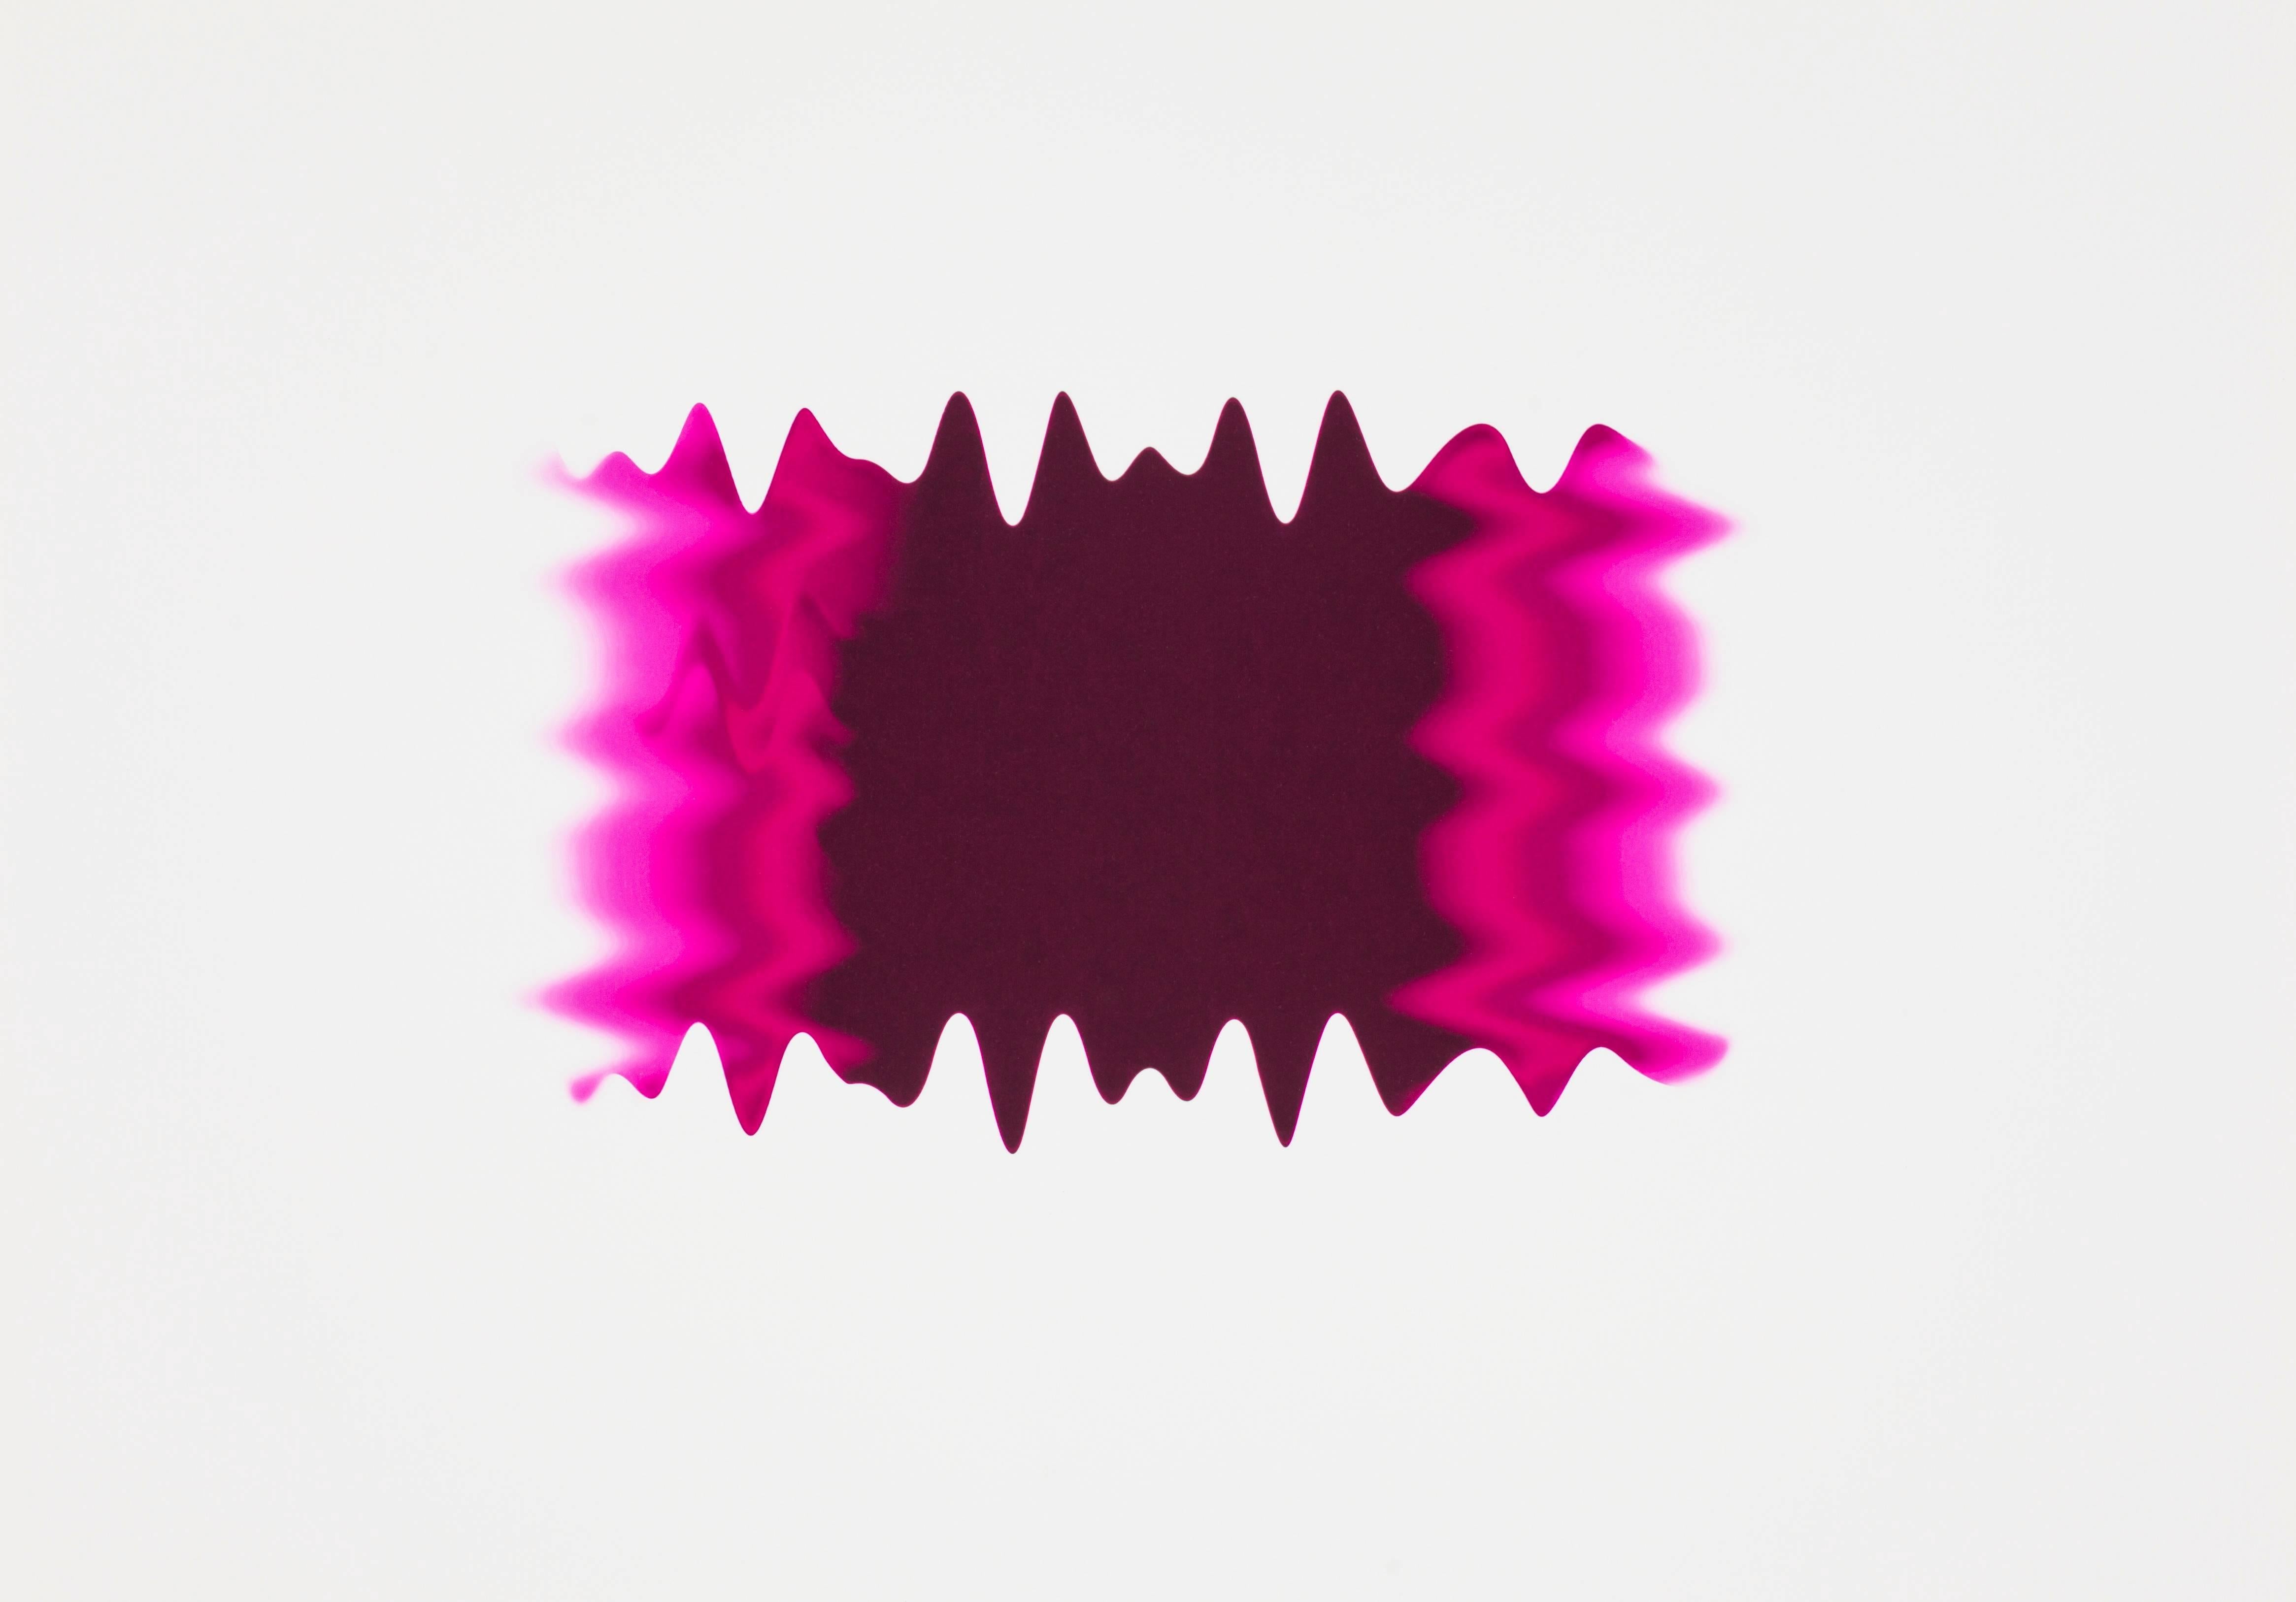 Peter Saville Abstract Print - New Wave Pink I